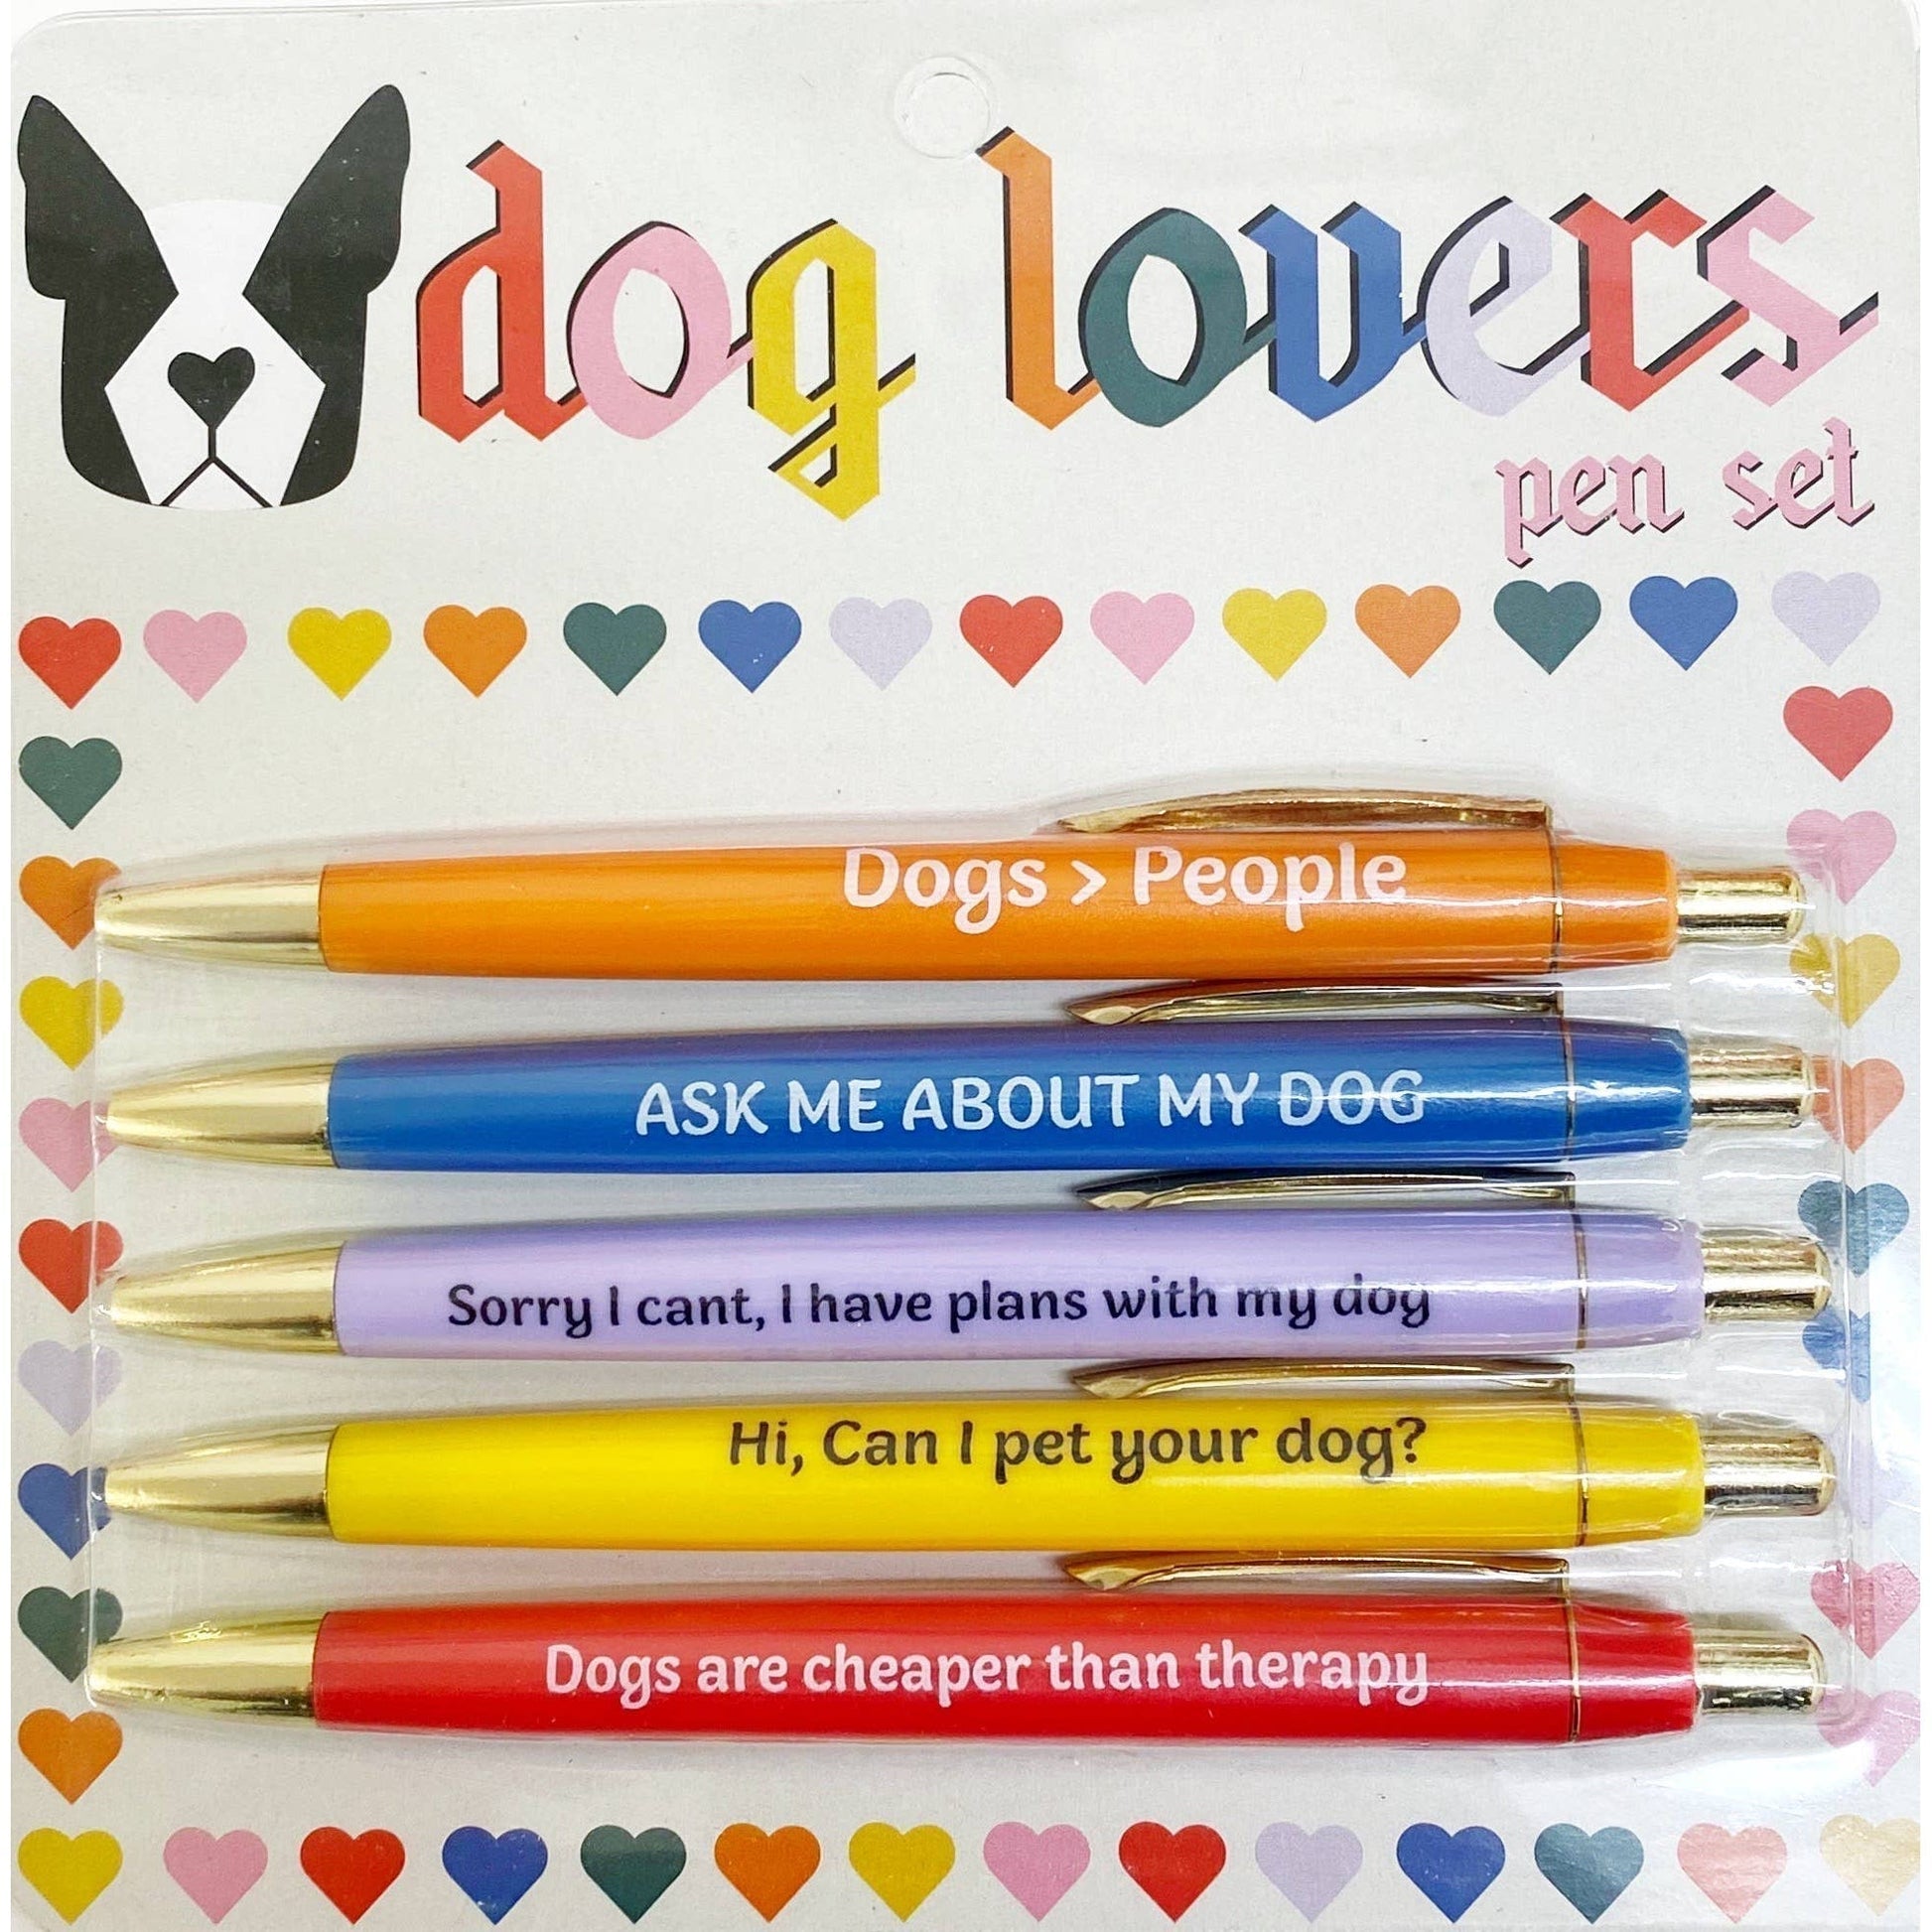 https://shop.getbullish.com/cdn/shop/files/Dog-Lovers-Multicolor-Pen-Set-5-Funny-Pens-Packaged-for-Gifting-Dogs-People-Dogs-Are-Cheaper-Than-Therapy.jpg?v=1690233497&width=1946